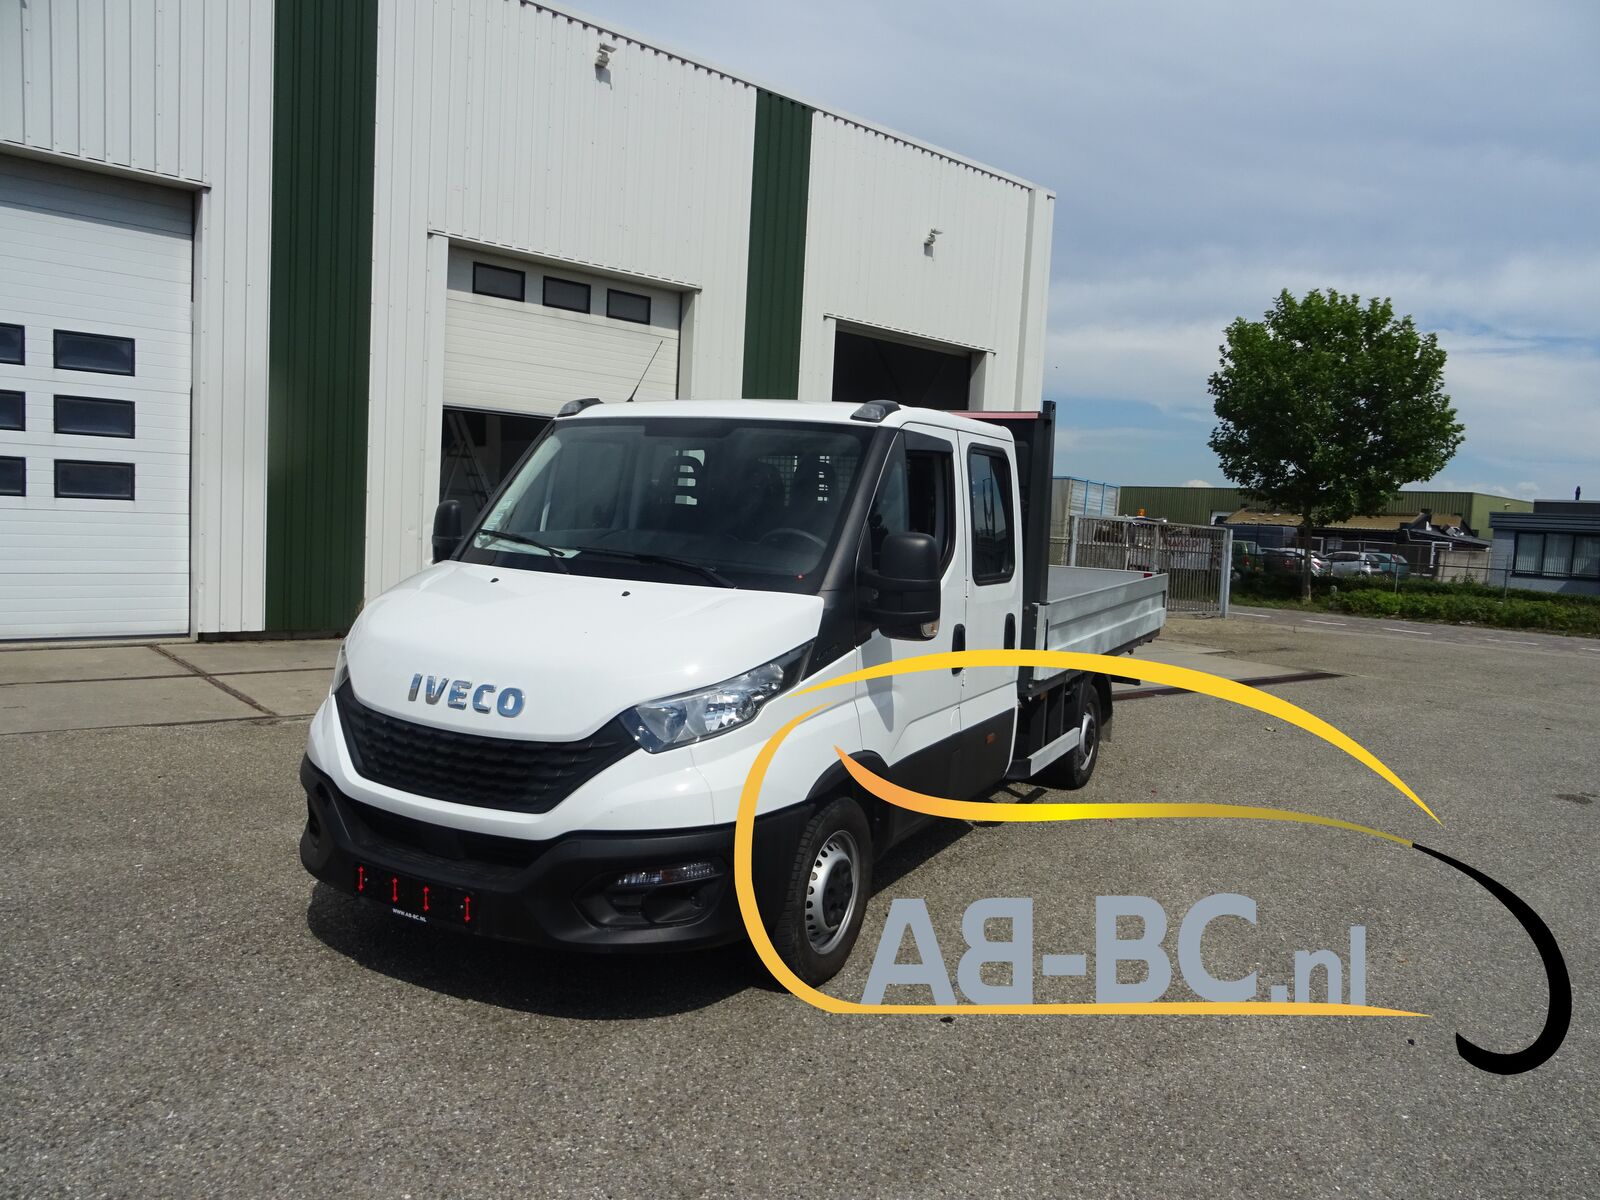 commercial-vehicle-flatbed-truck-3-5t-IVECO-Daily-35s14-DC-openlaadbak---1661344713498571384_orig_23e16384c51c2f9cb3d89bd5ac6a3ce8--22082415210565311400